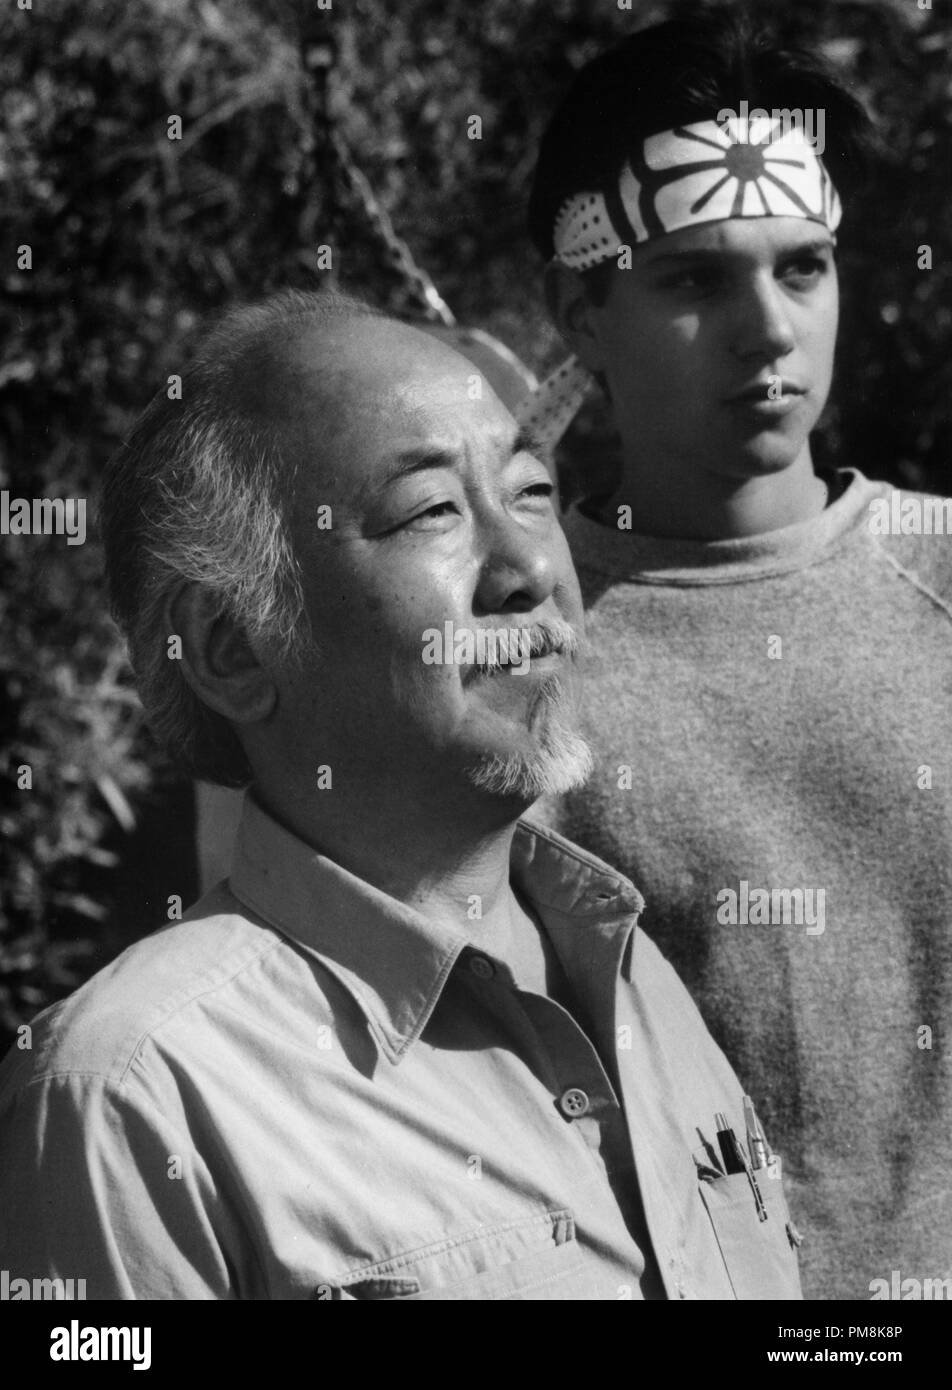 Film still or Publicity still from 'The Karate Kid, Part III' Pat Morita and Ralph Macchio © 1989 Columbia Pictures  All Rights Reserved   File Reference # 31623044THA  For Editorial Use Only Stock Photo